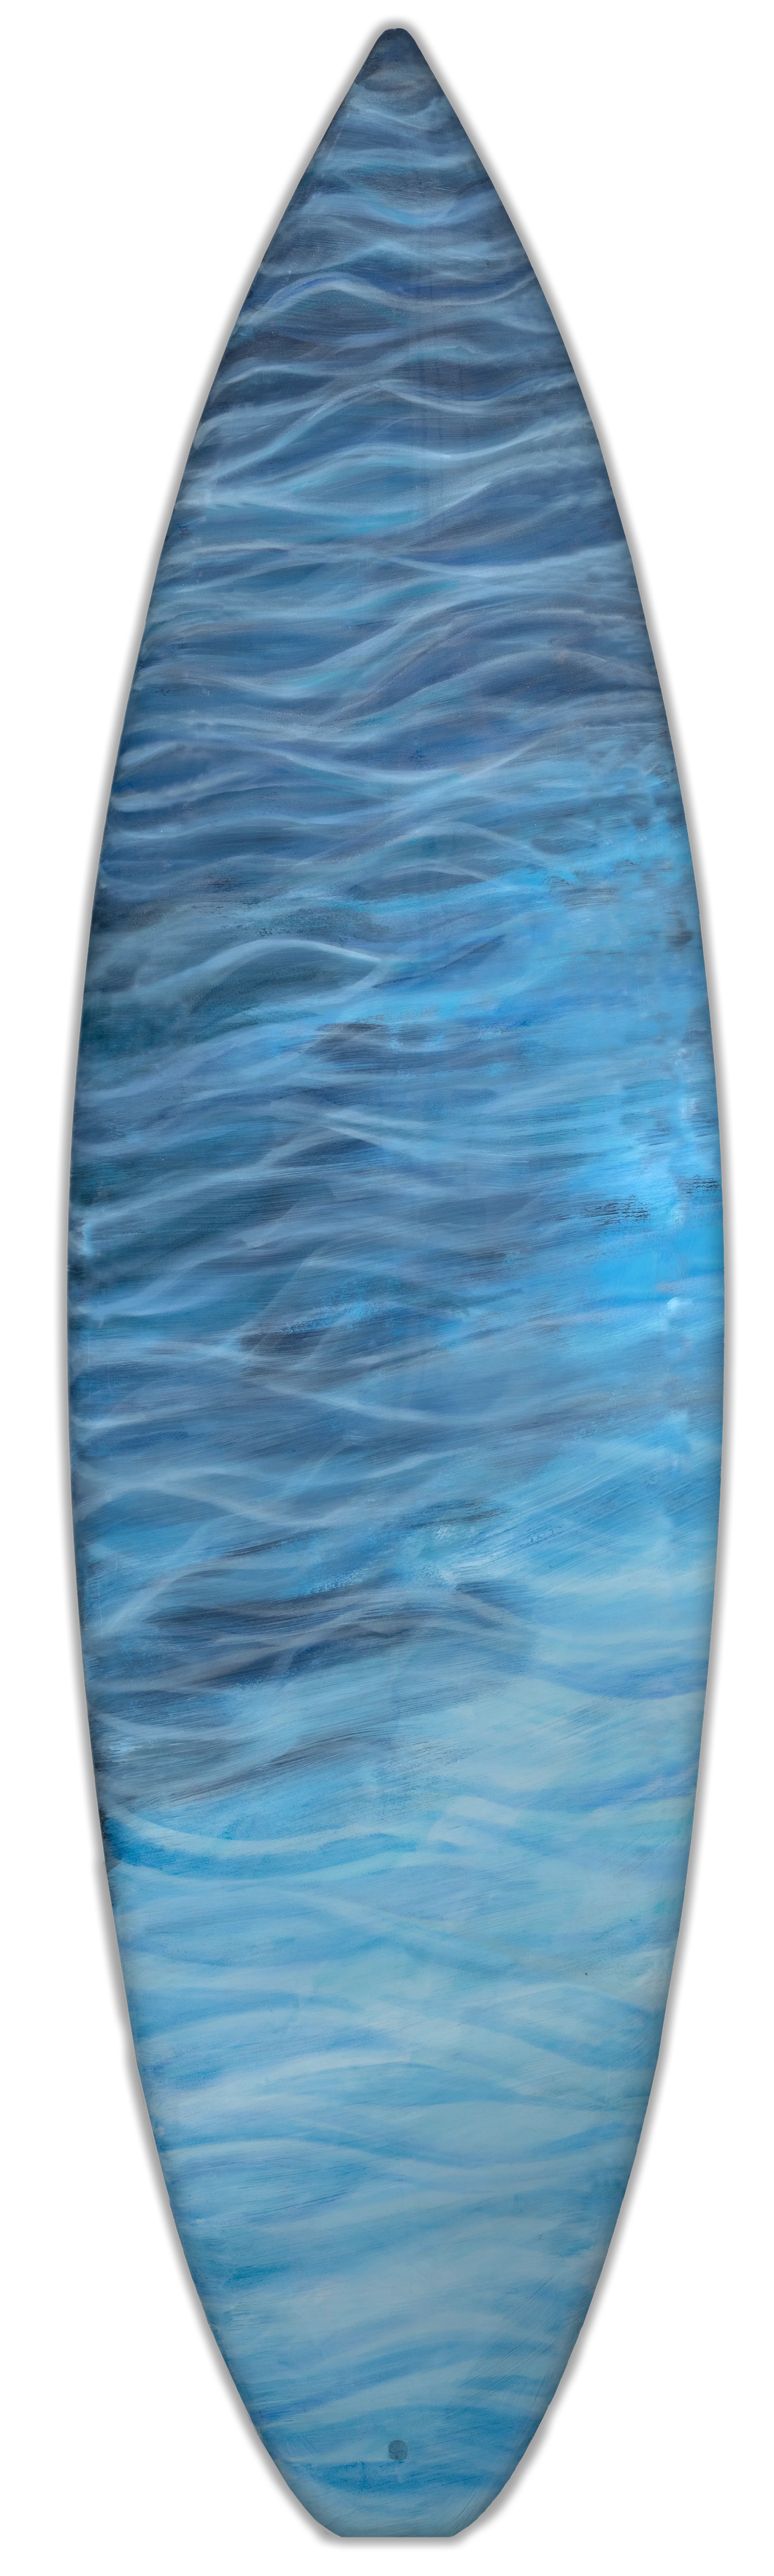 Rise to the Moment - Surfboard Art